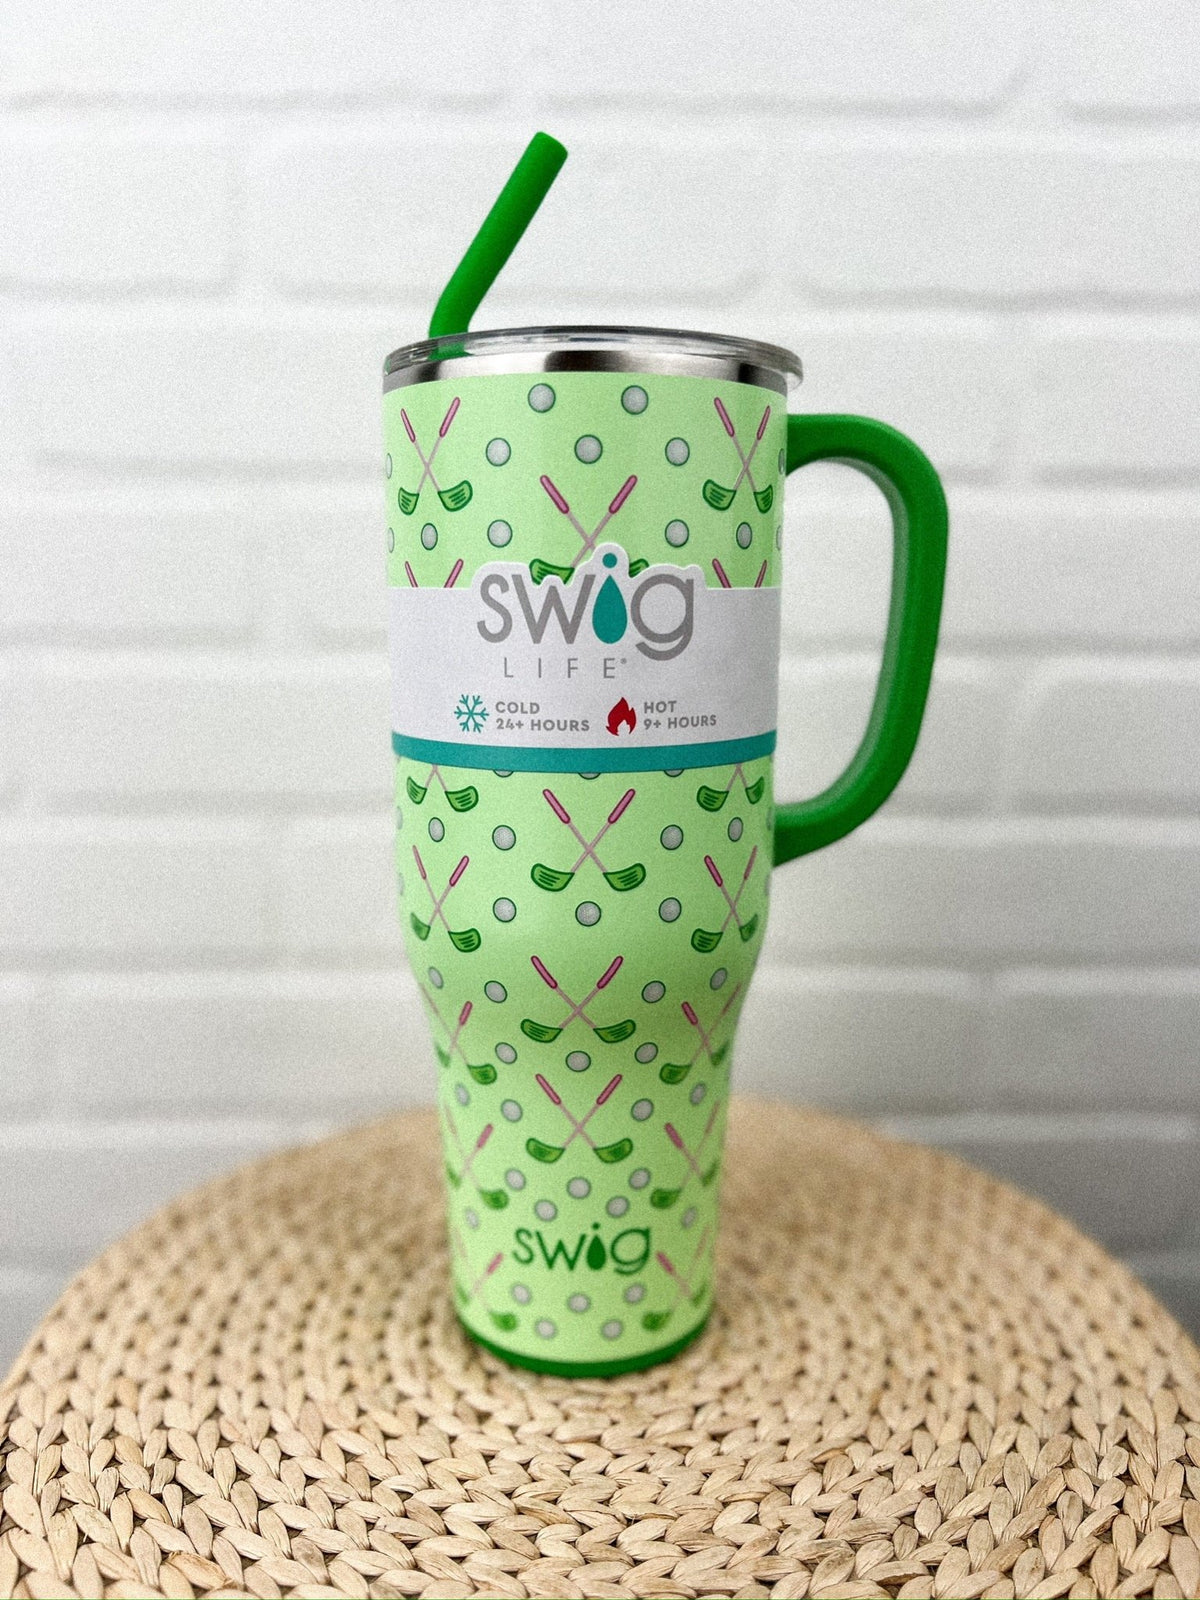 Swig Tee Time 40oz tumbler - Trendy Tumblers, Mugs and Cups at Lush Fashion Lounge Boutique in Oklahoma City